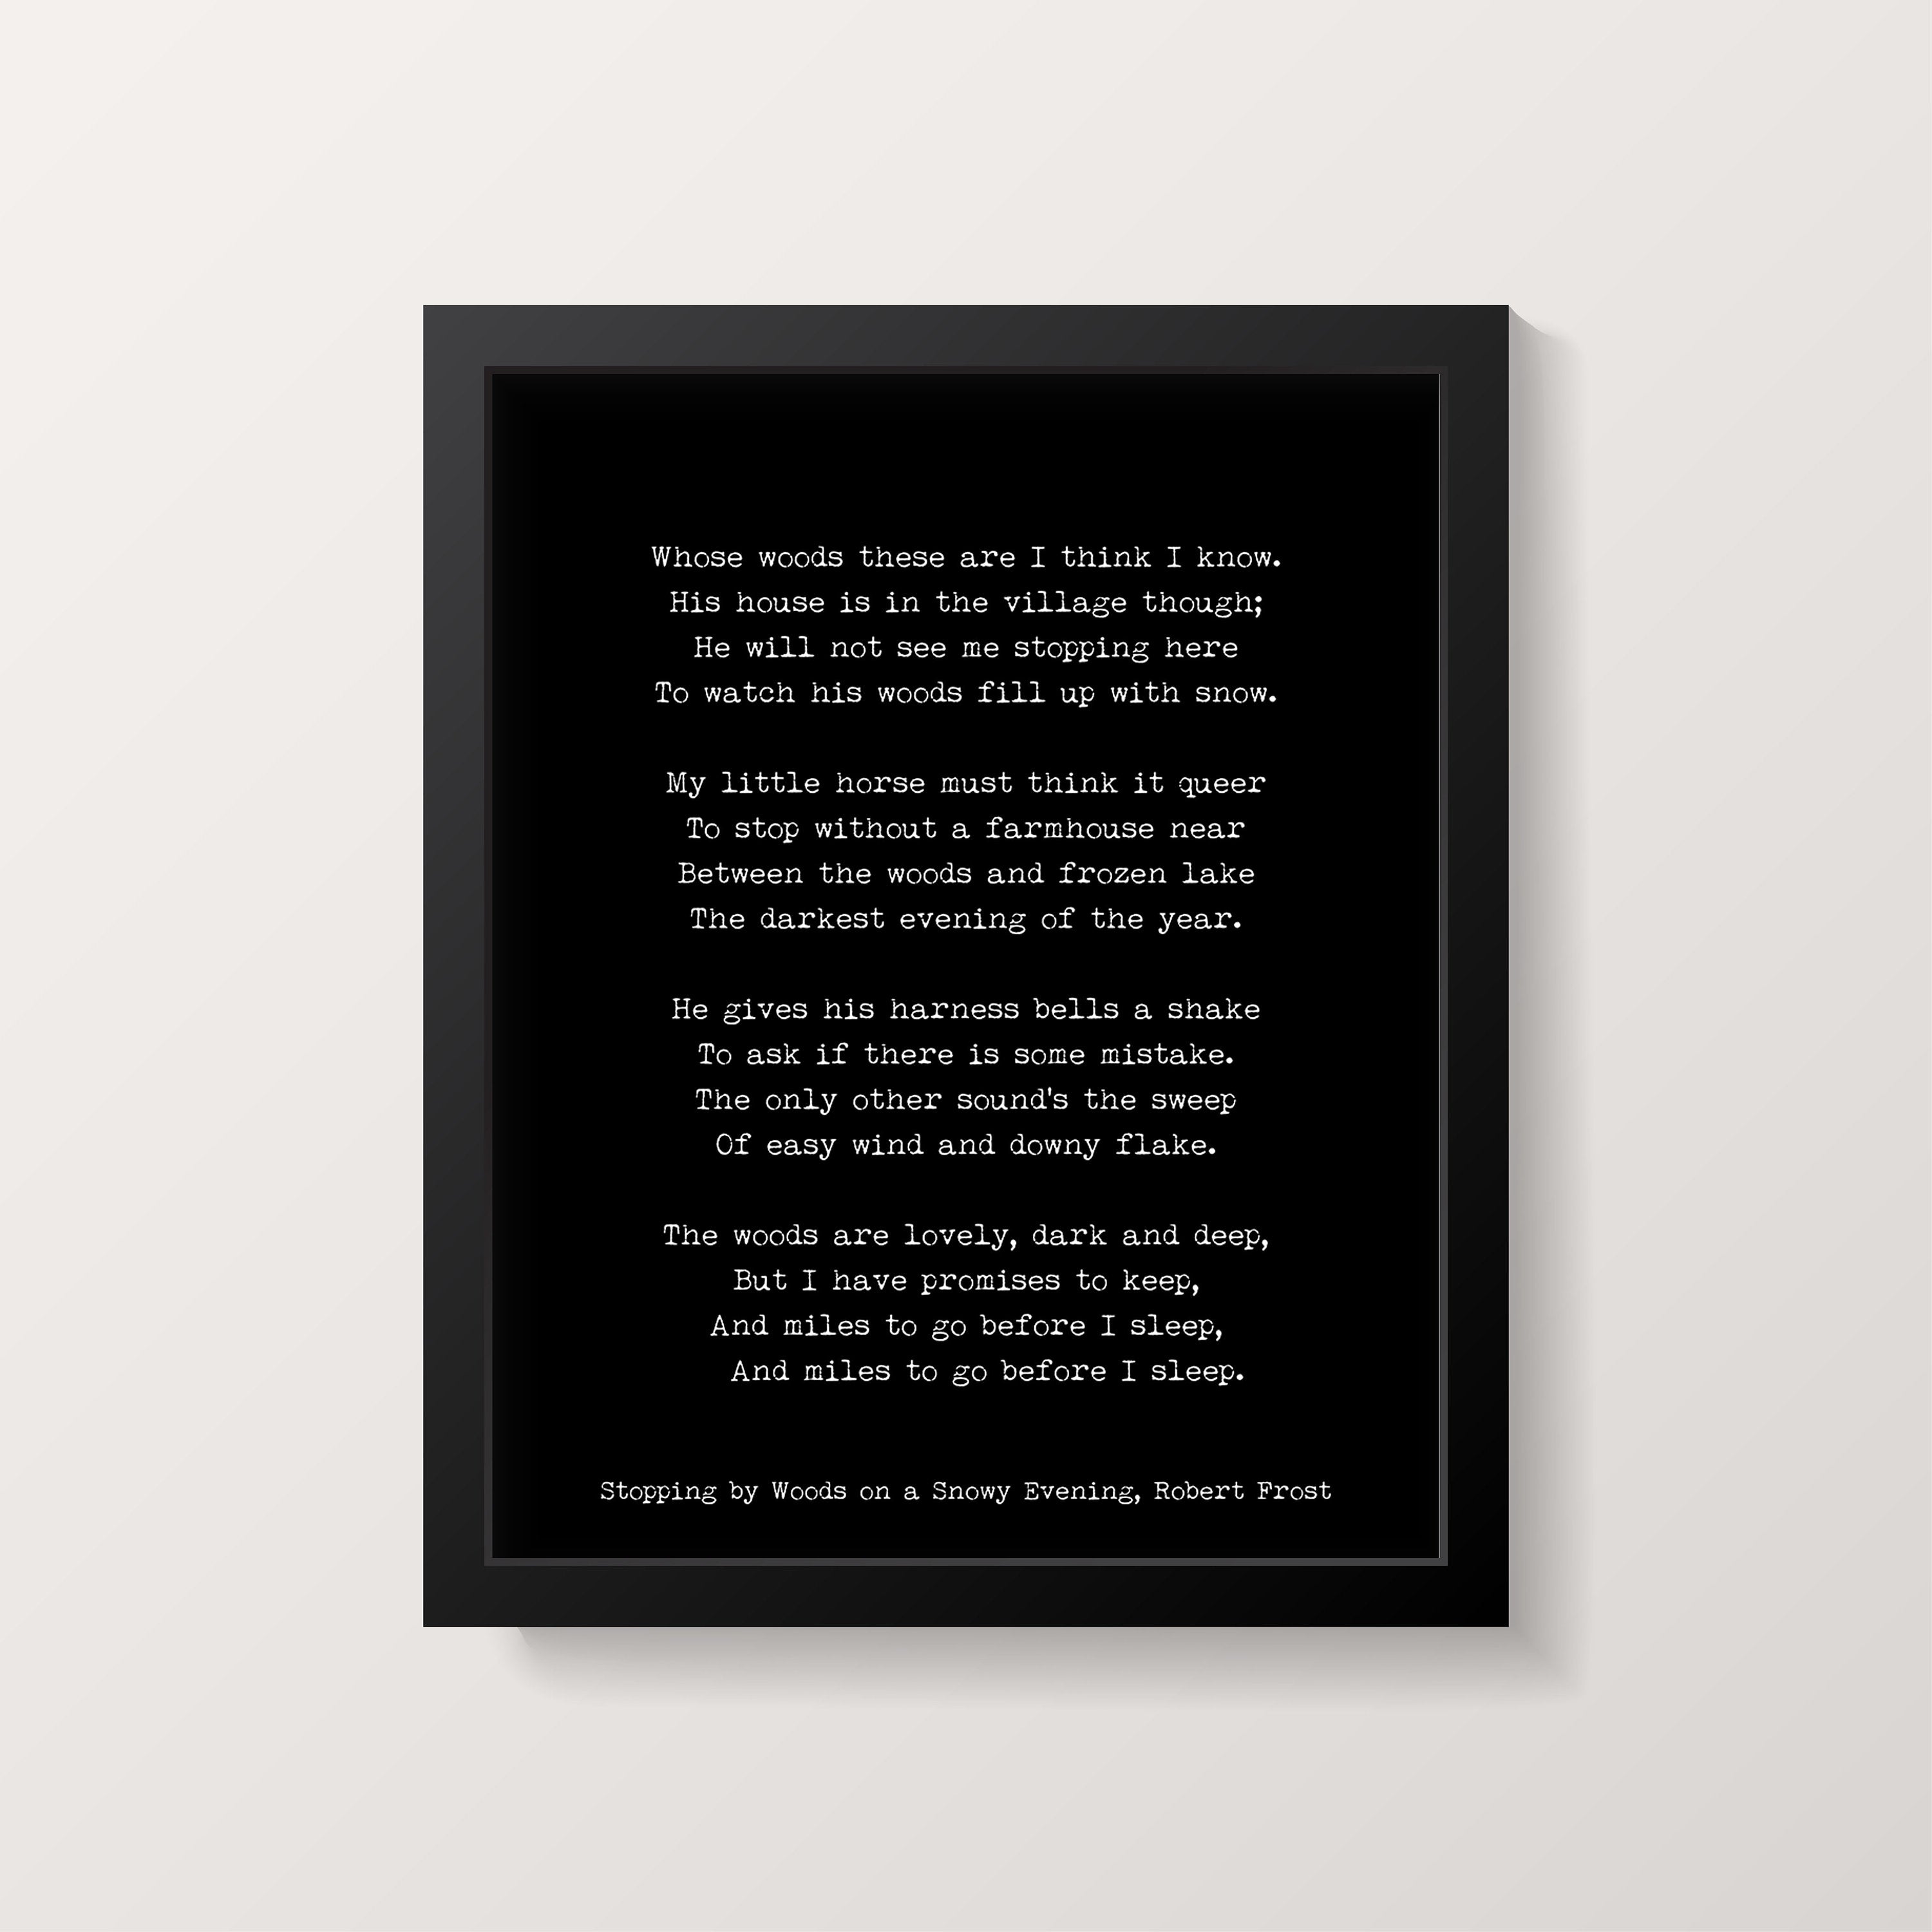 Robert Frost Poem Print, Miles to go Before I sleep Poetry Poster in Black & White for Home Wall Decor, Snowy Evening Unframed Print - BookQuoteDecor